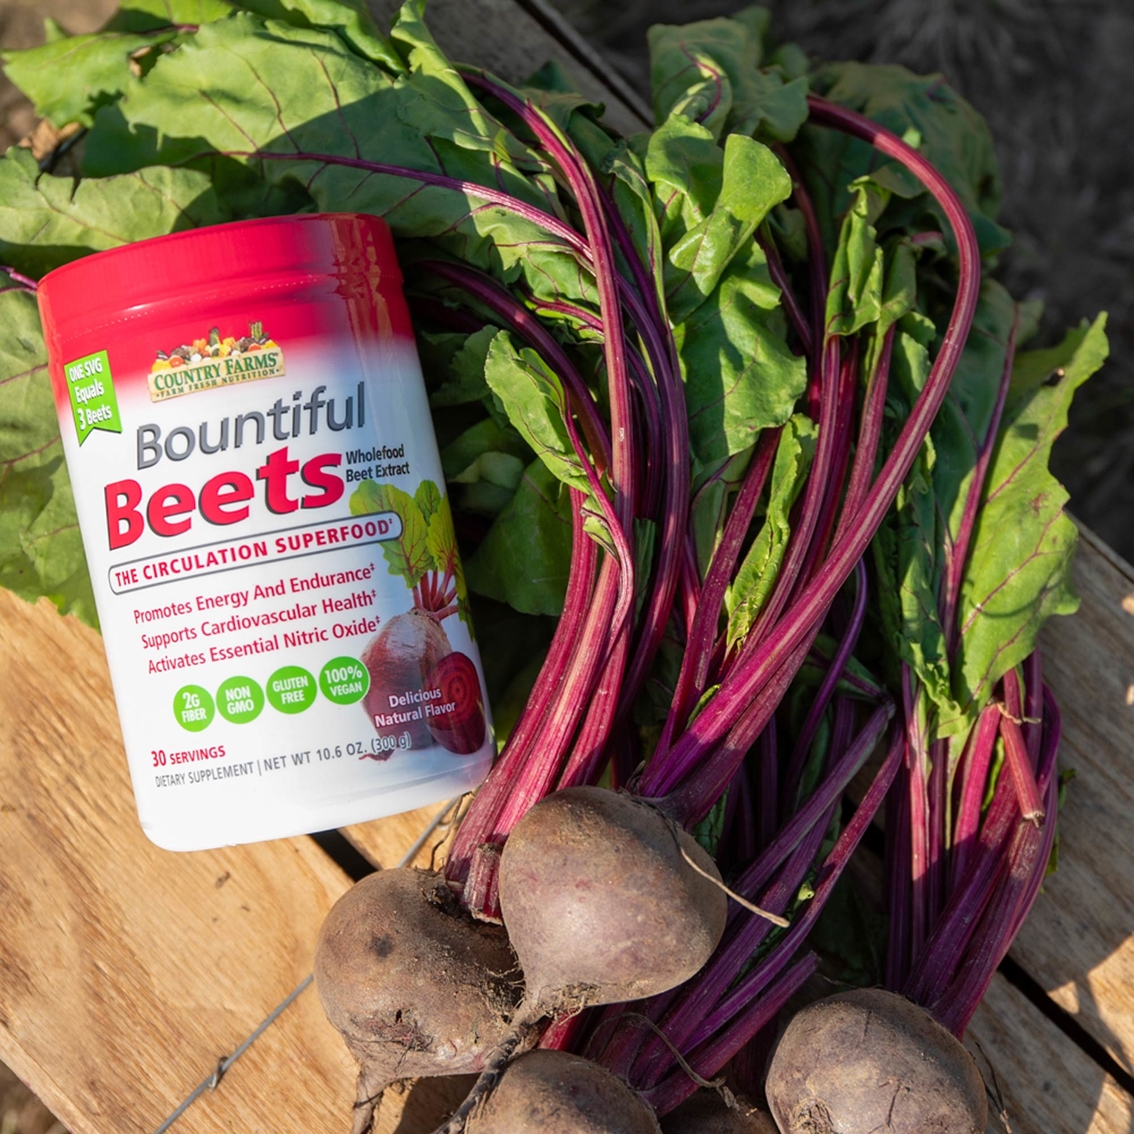 Country Farms Bountiful Beets 10.6 oz. - Image 7 of 7